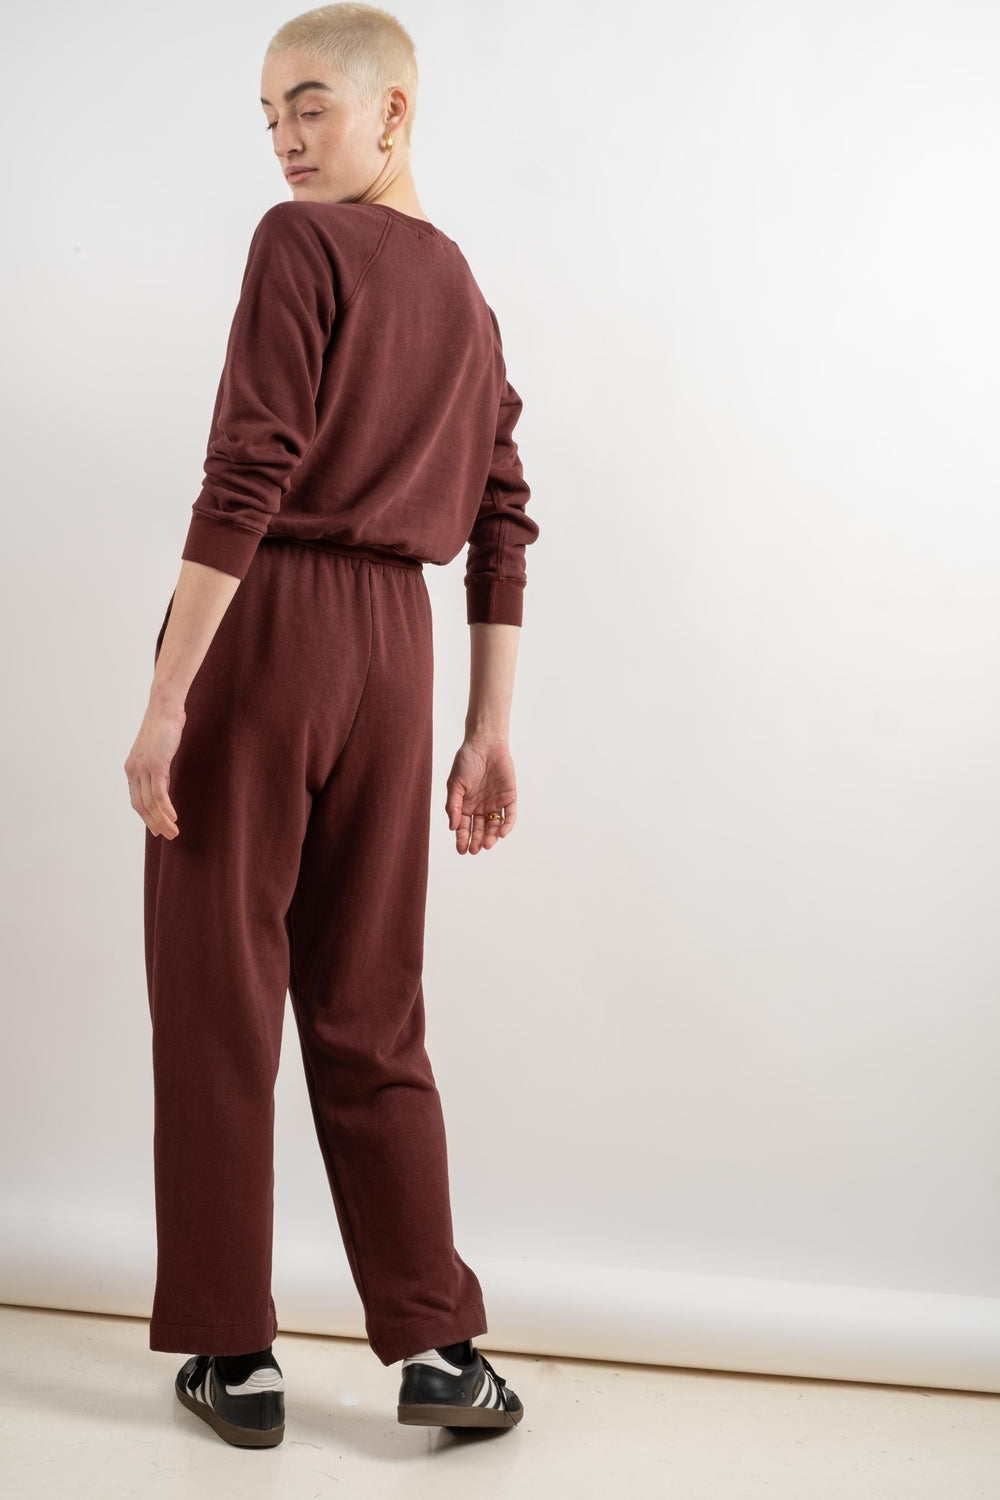 The New Sweatpant In Burgundy